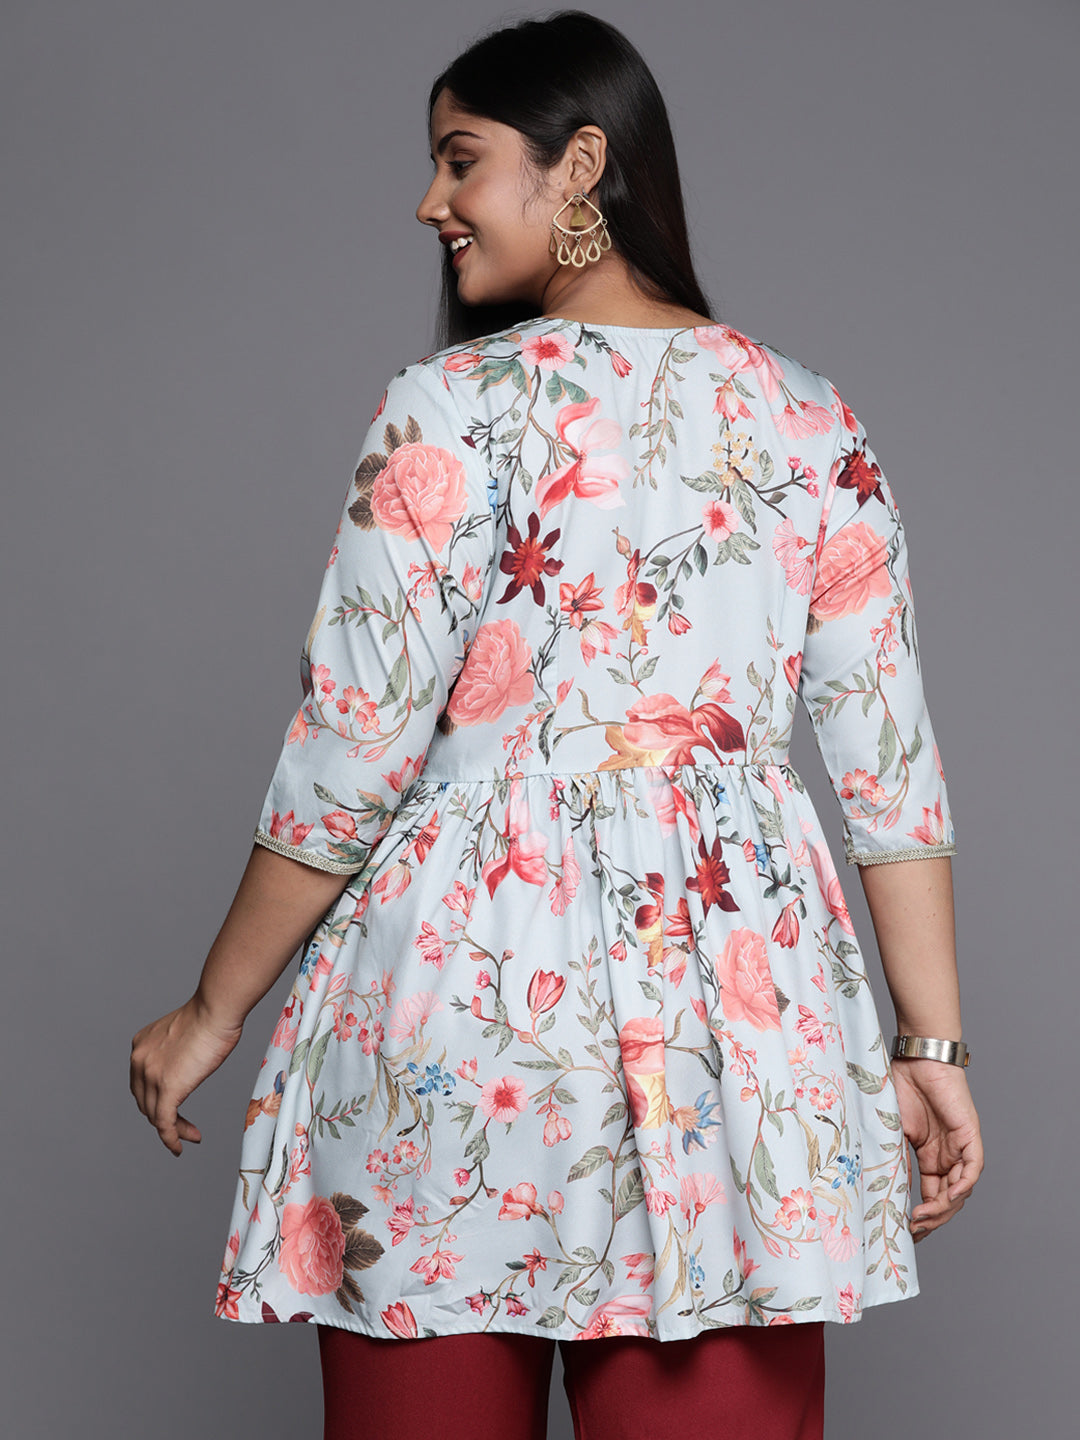 Sea Green & Pink Floral Printed Plus Size Tunic